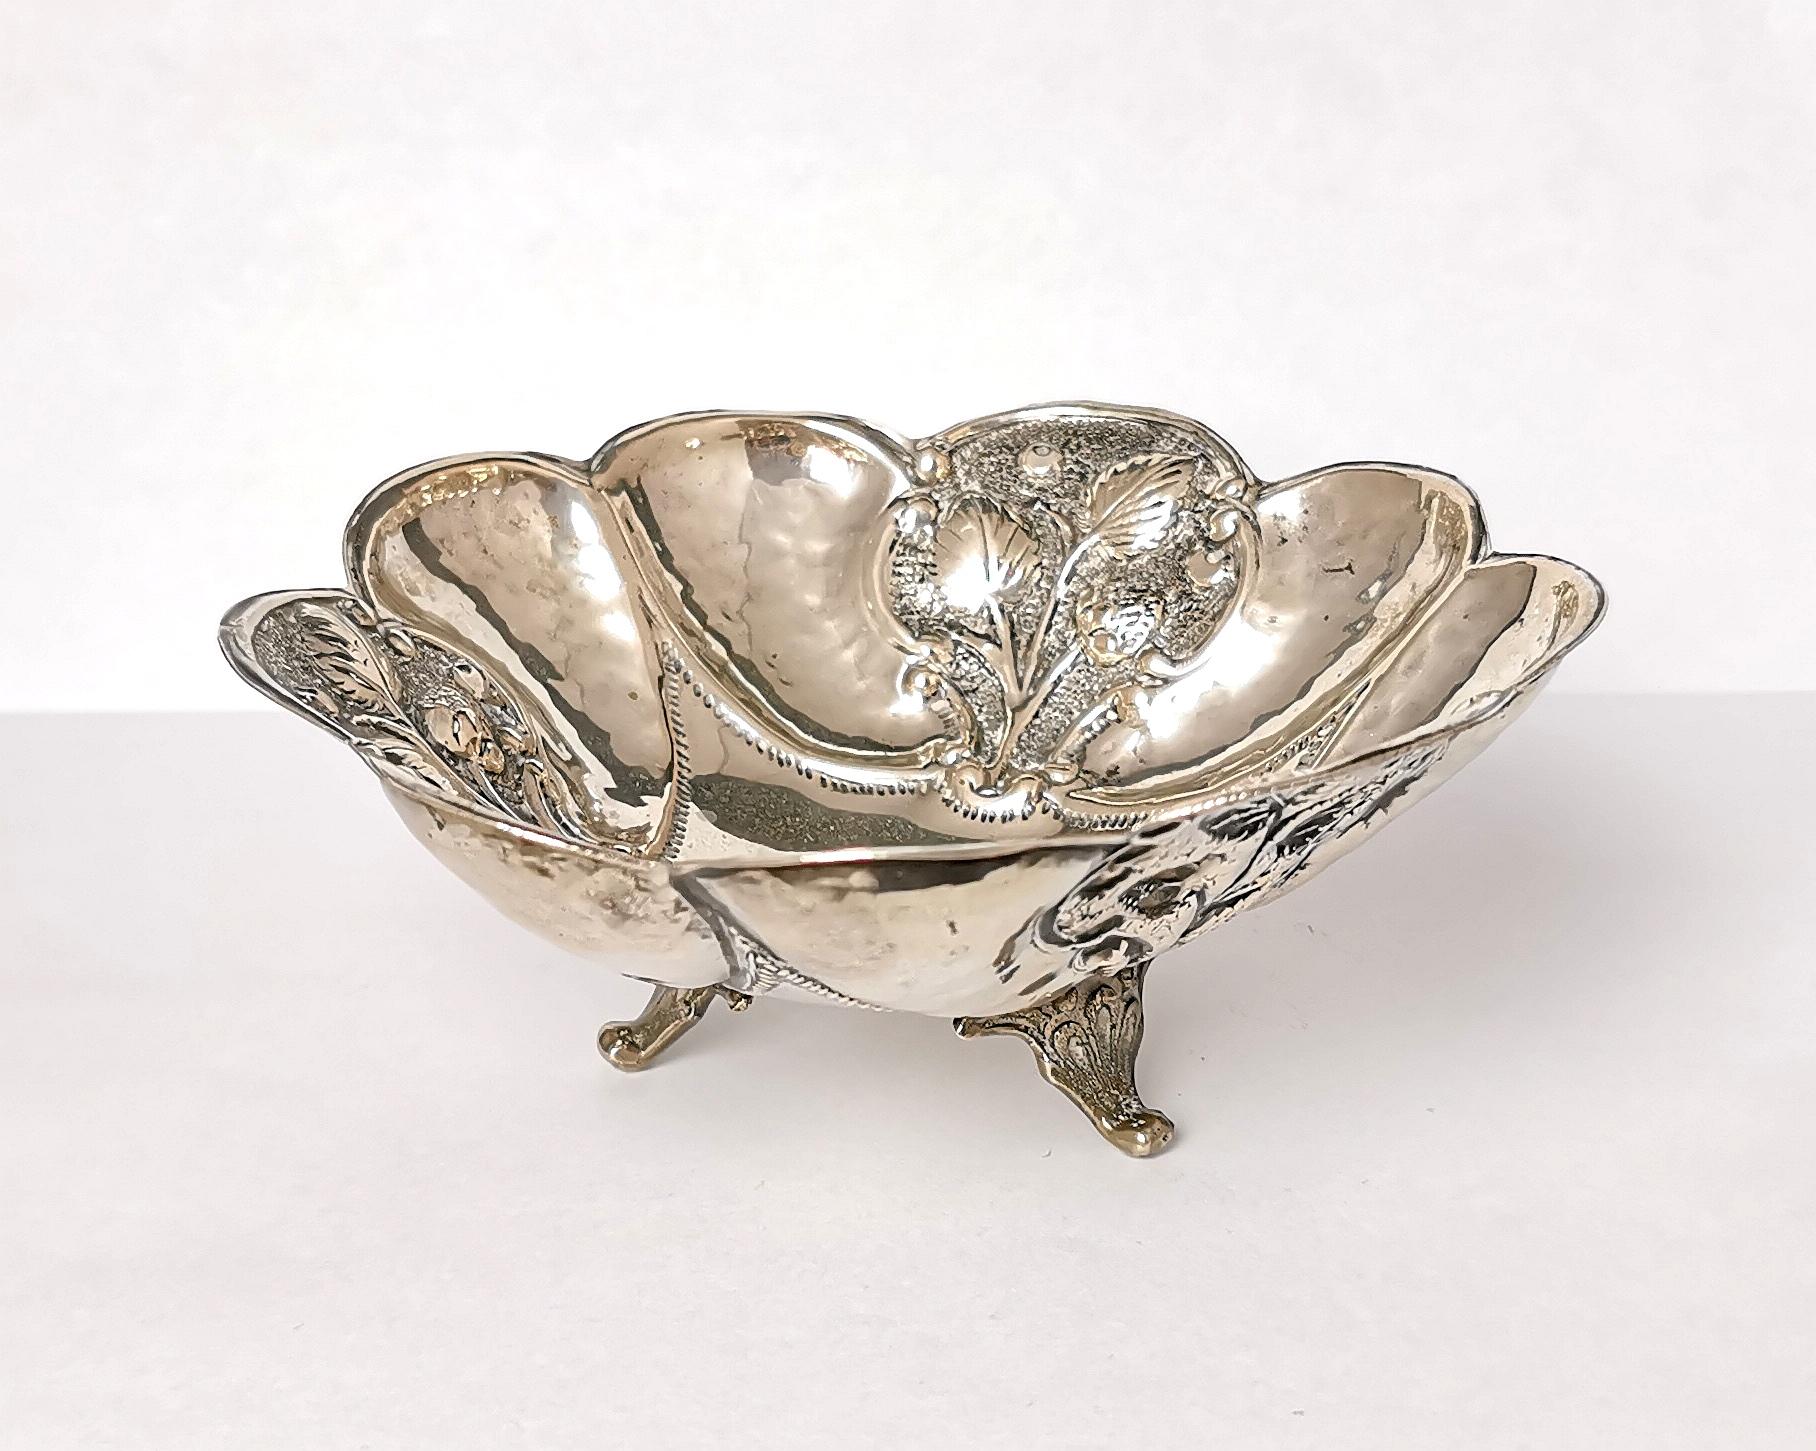 A beautiful Greek vintage sterling silver bowl or dish.

It has an attractive lobed shape and rim with repousse designs inside of foliate and flora.

It stands raised on three curved feet.

This would make a perfect centrepiece bowl, it is